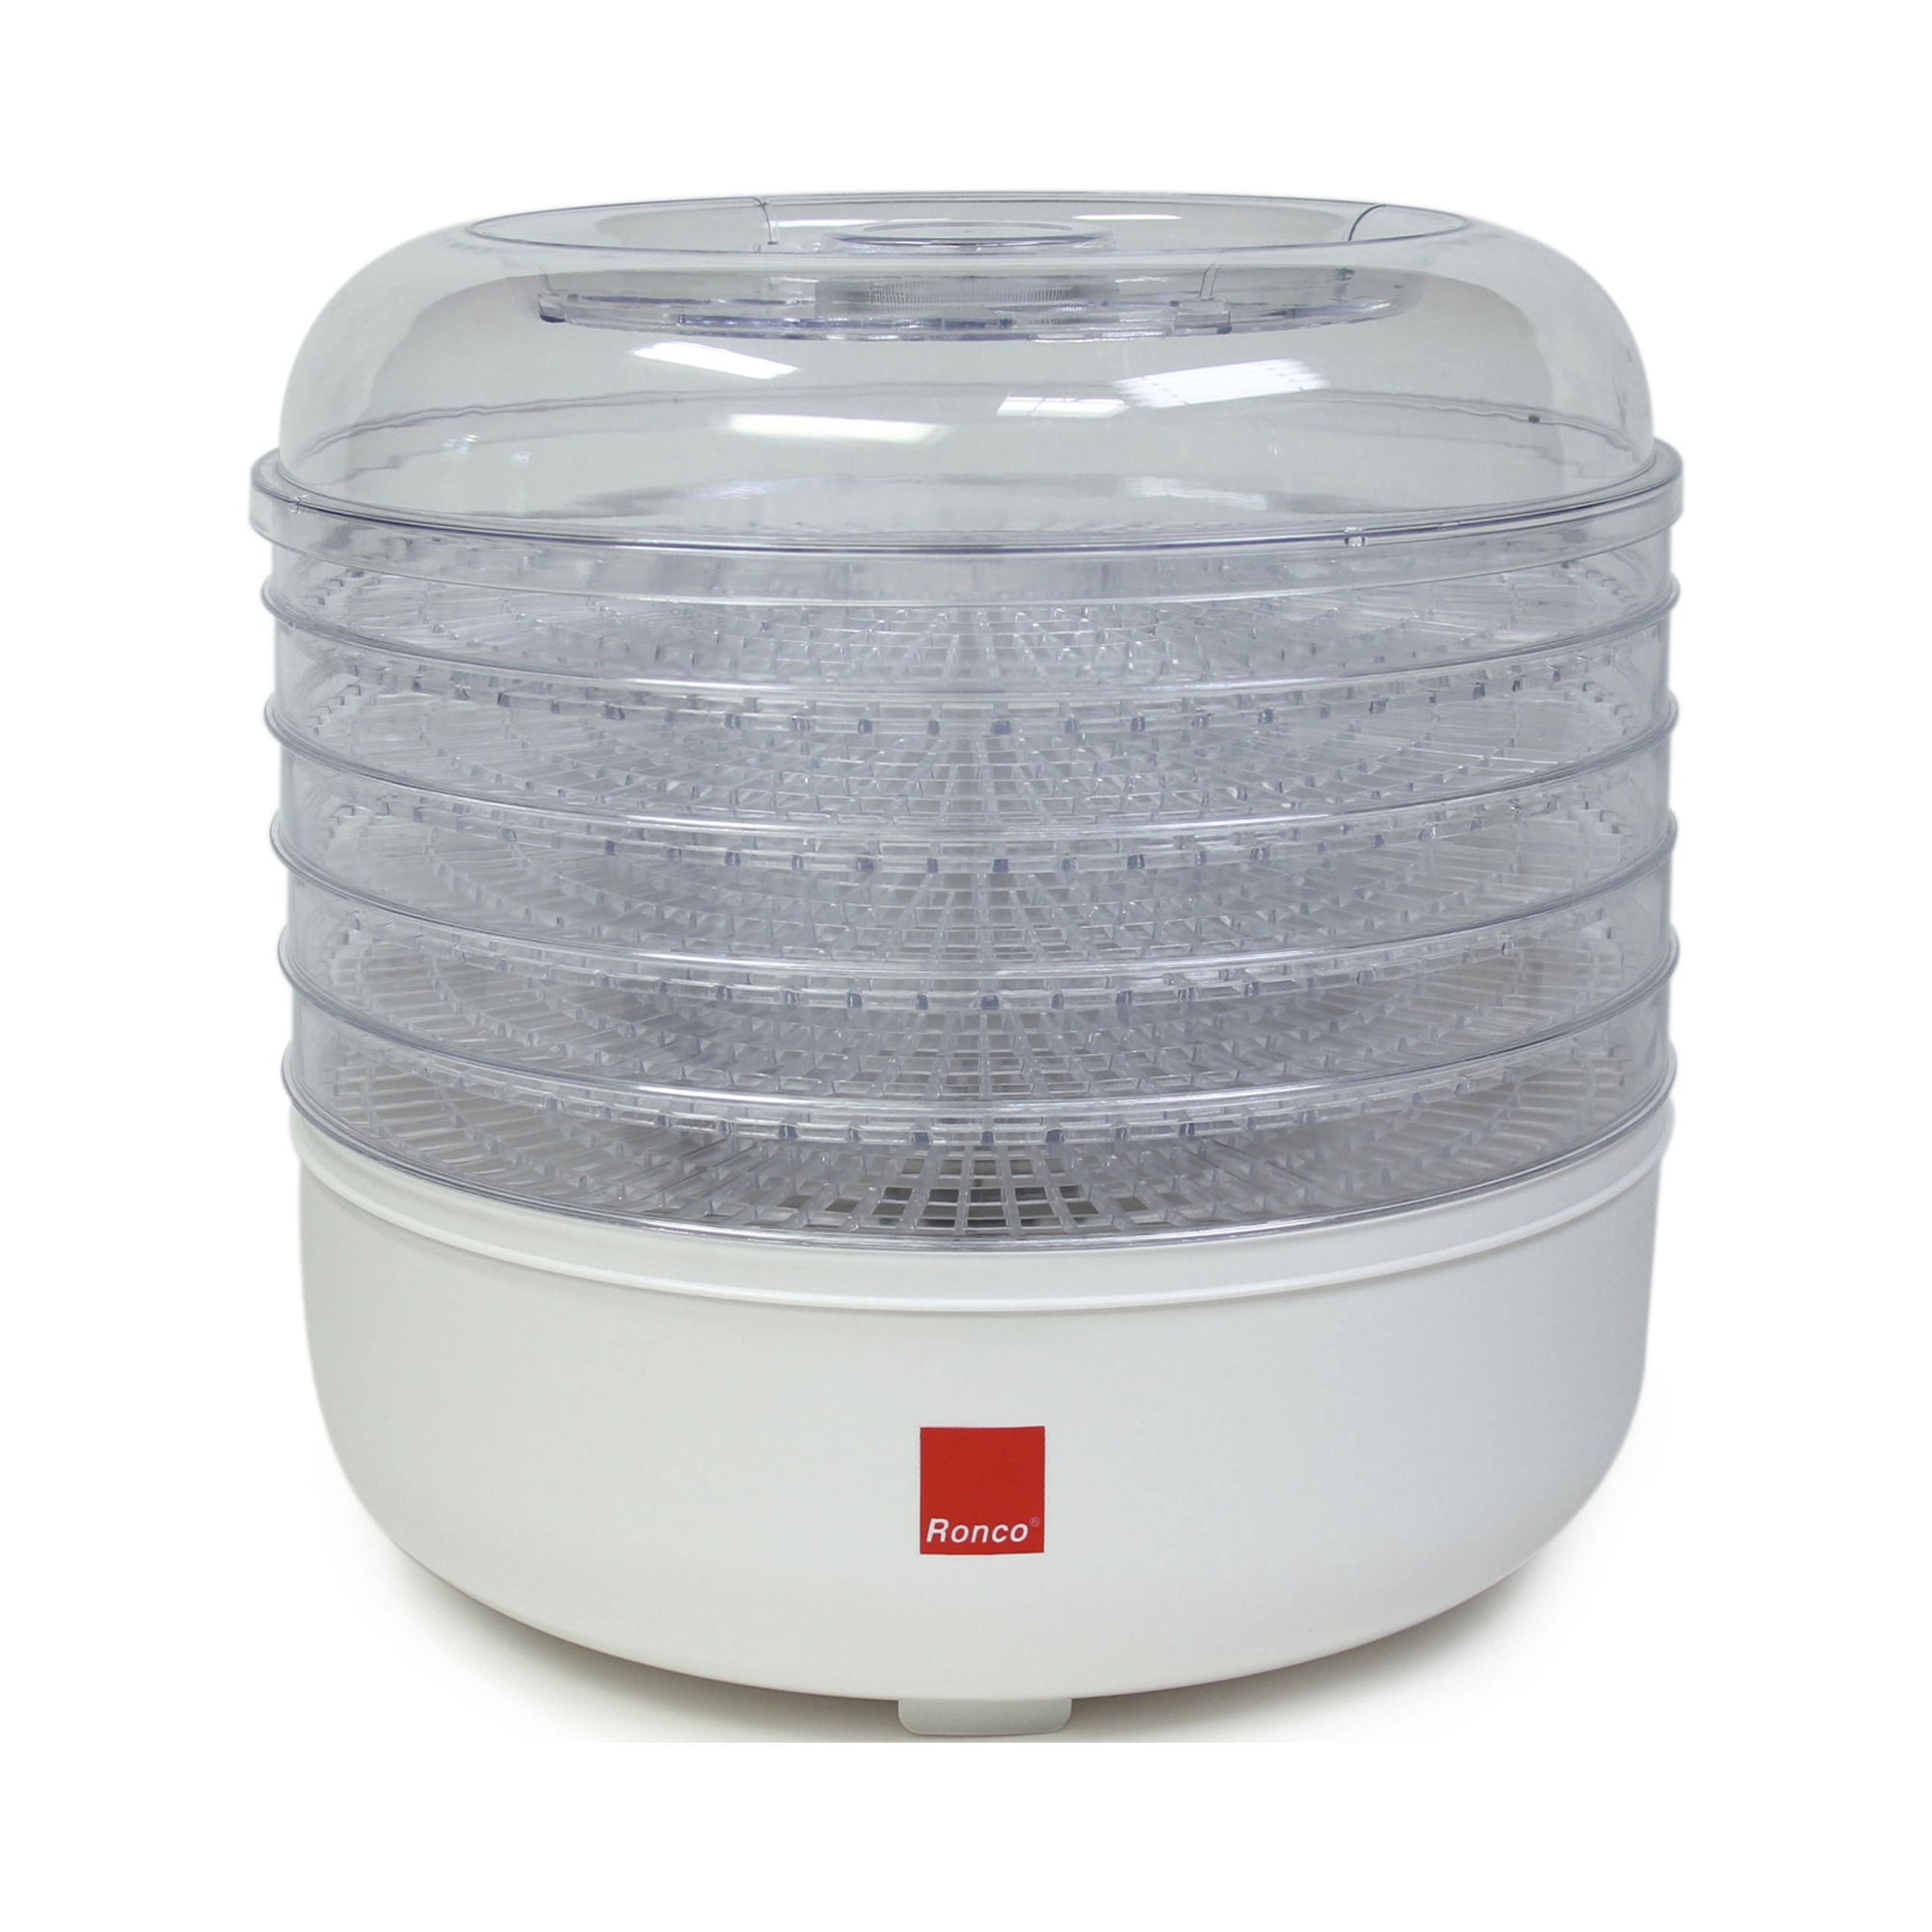 Ronco Five-Tray Food Dehydrator - image 1 of 3